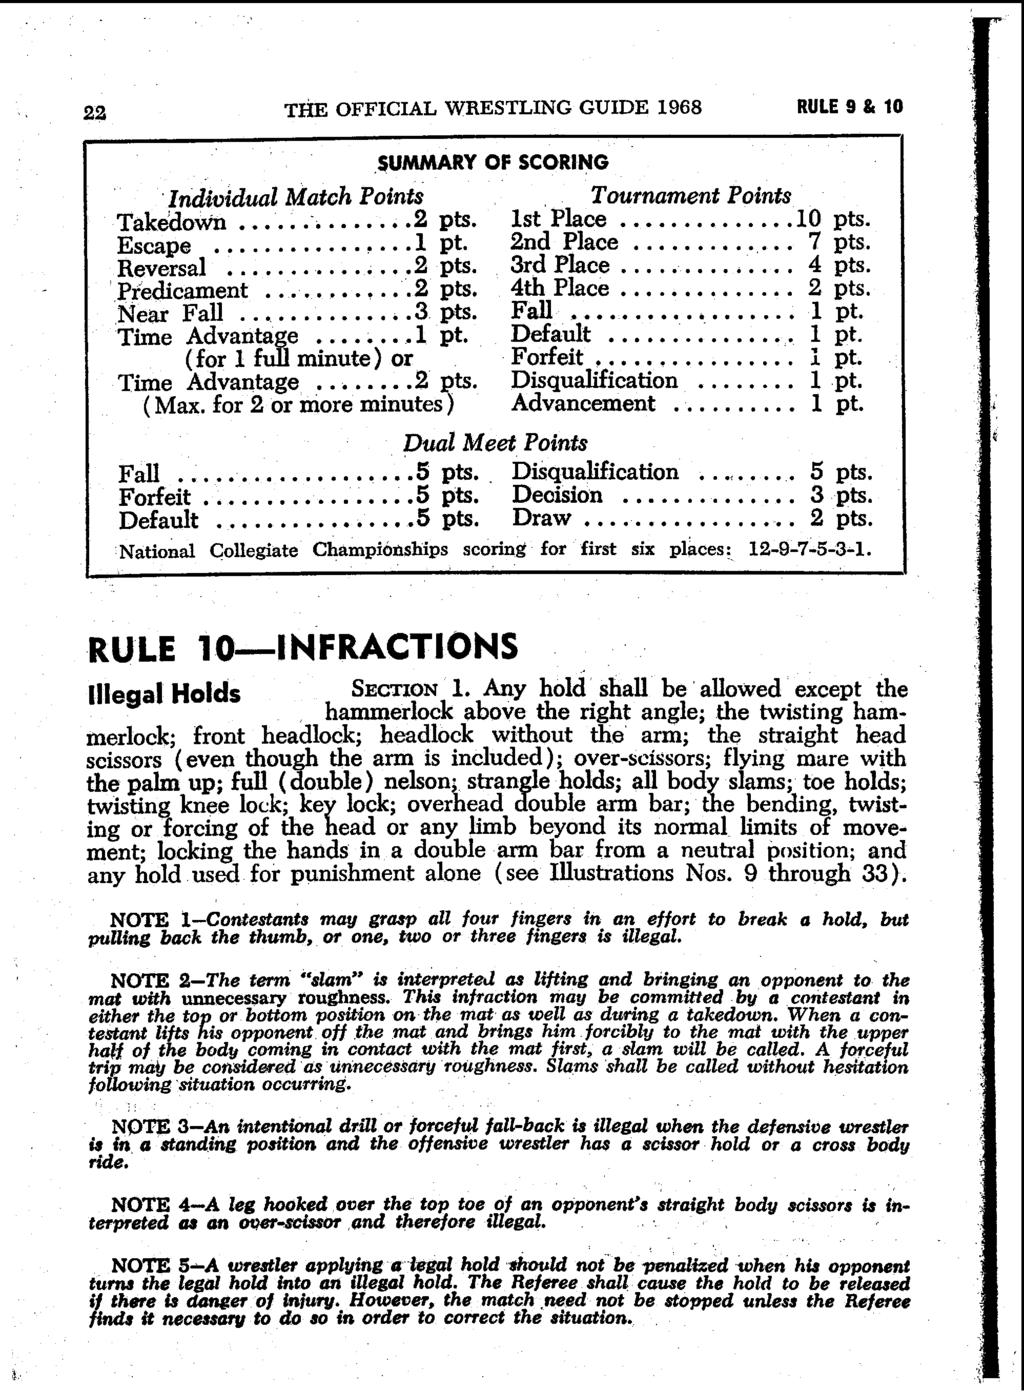 22 THE OFFICIAL WRESTLING GUIDE 1968 RULE 9 & 10 SUMMARY OF SCORING Individual Match Points Takedown...2 pts. Escape... 1 pt. Reversal...2 pts. 3rd Place Predicament...2 pts. Near Fall.3 pts.